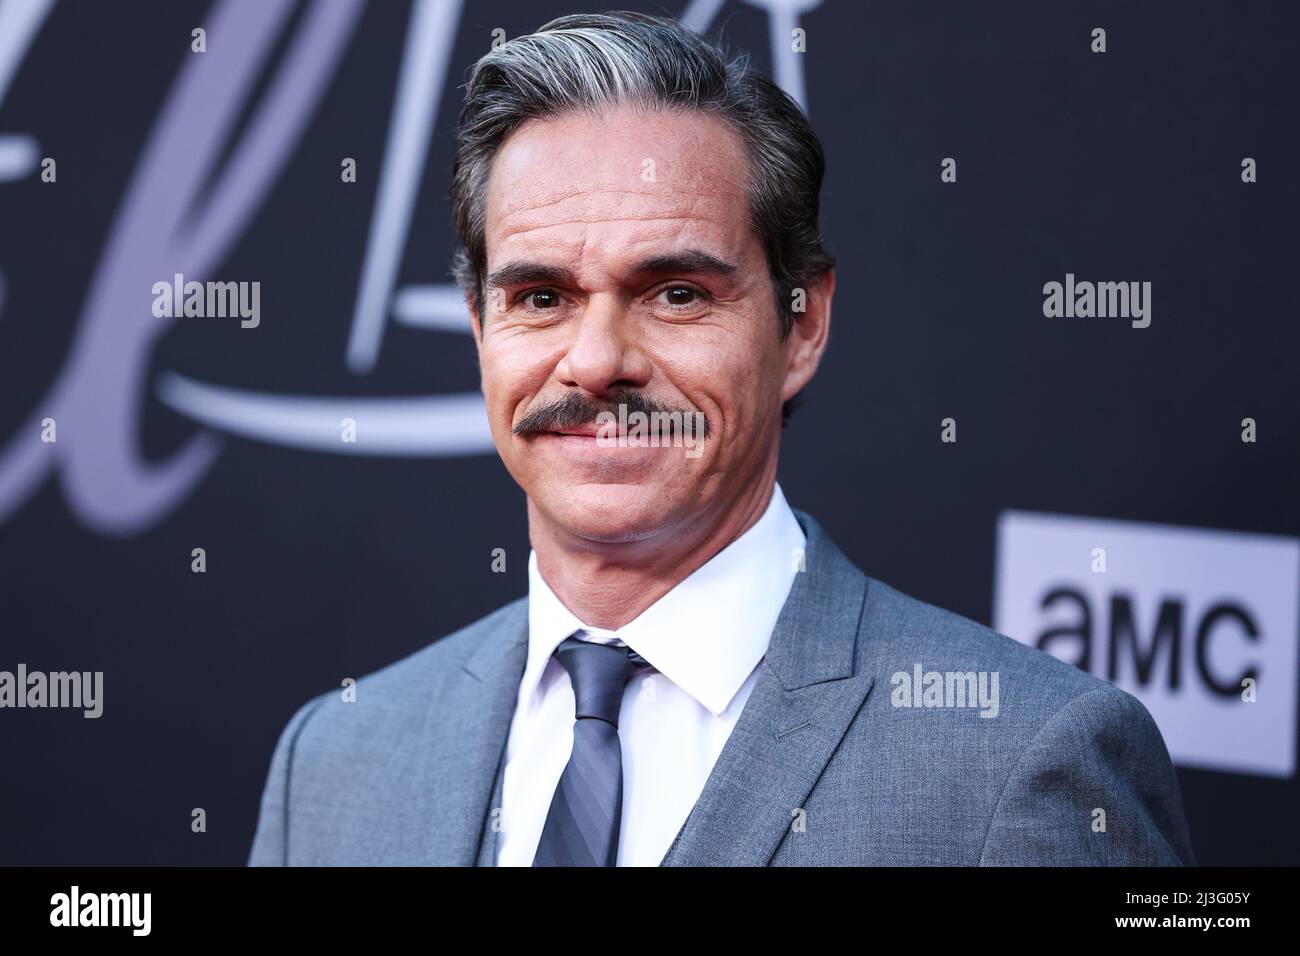 Hollywood, United States. 07th Apr, 2022. HOLLYWOOD, LOS ANGELES, CALIFORNIA, USA - APRIL 07: Tony Dalton arrives at the Los Angeles Premiere Of AMC's 'Better Call Saul' Season 6 held at the Hollywood American Legion Theatre Post 43 on April 7, 2022 in Hollywood, Los Angeles, California, United States. (Photo by Xavier Collin/Image Press Agency) Credit: Image Press Agency/Alamy Live News Stock Photo